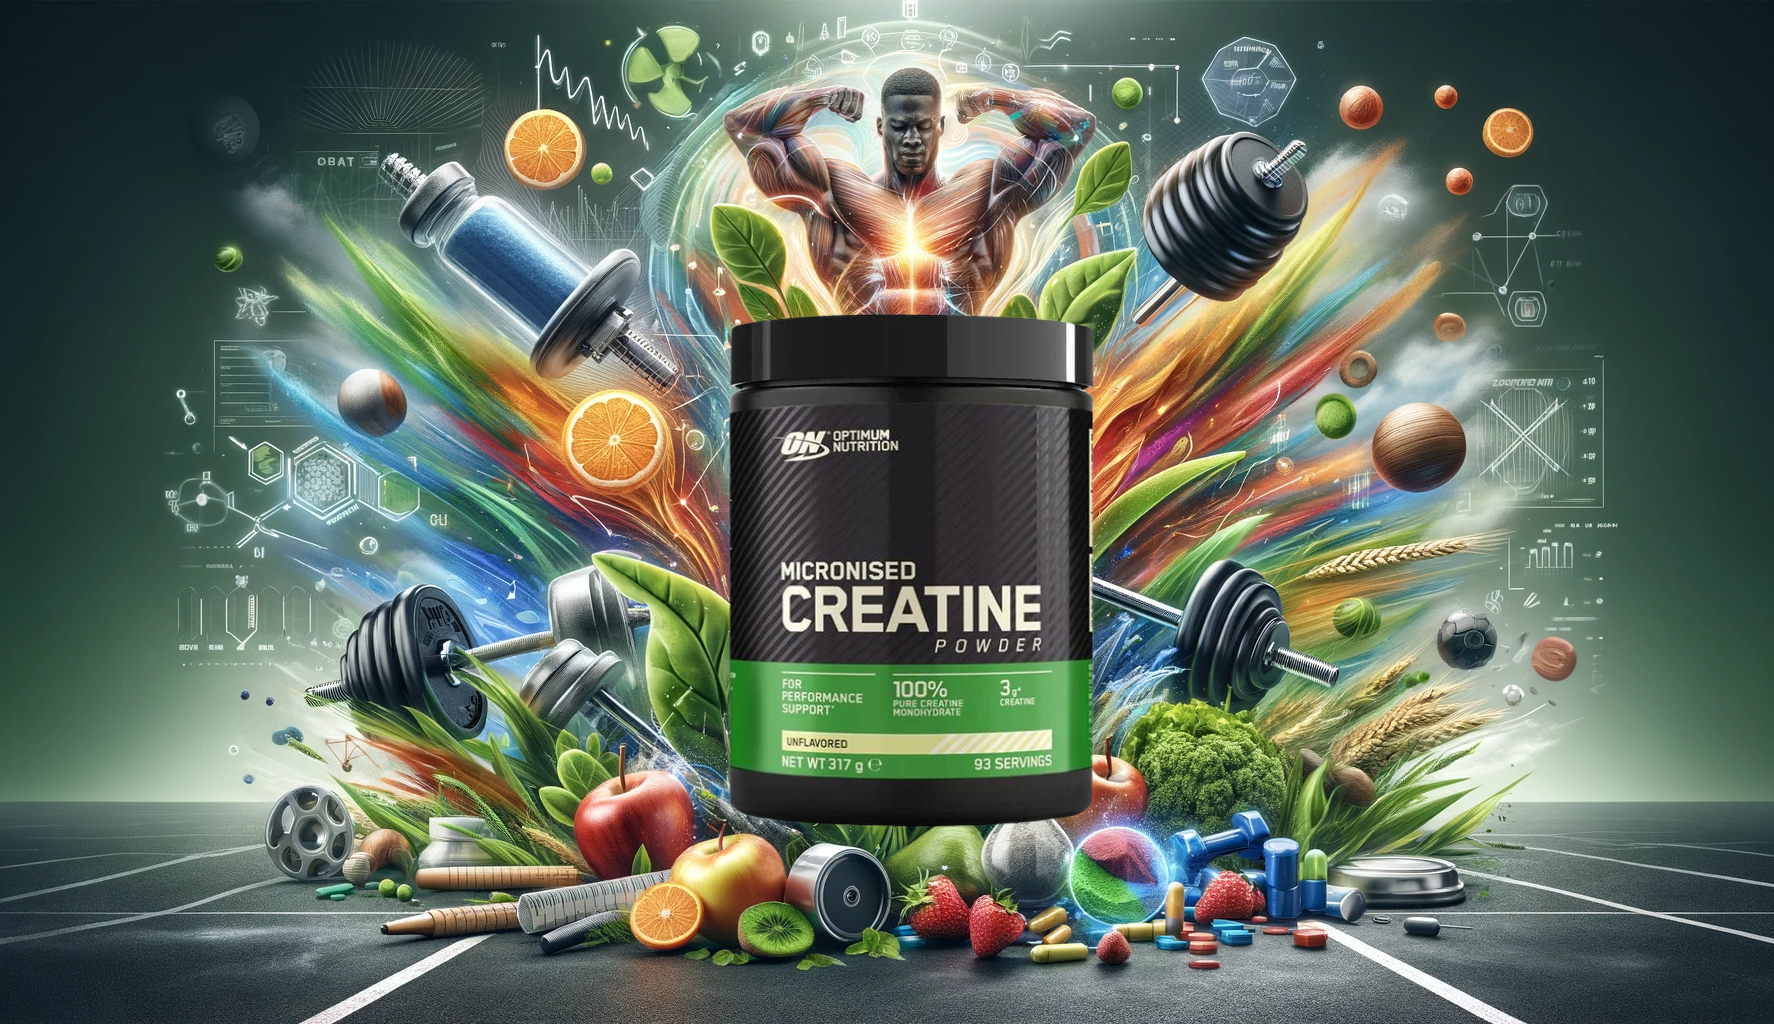 Header image for Optimum Nutrition Creatine blog, featuring the supplement with gym gear and healthy foods on a vibrant, health-themed background, emphasizing fitness and holistic wellness.